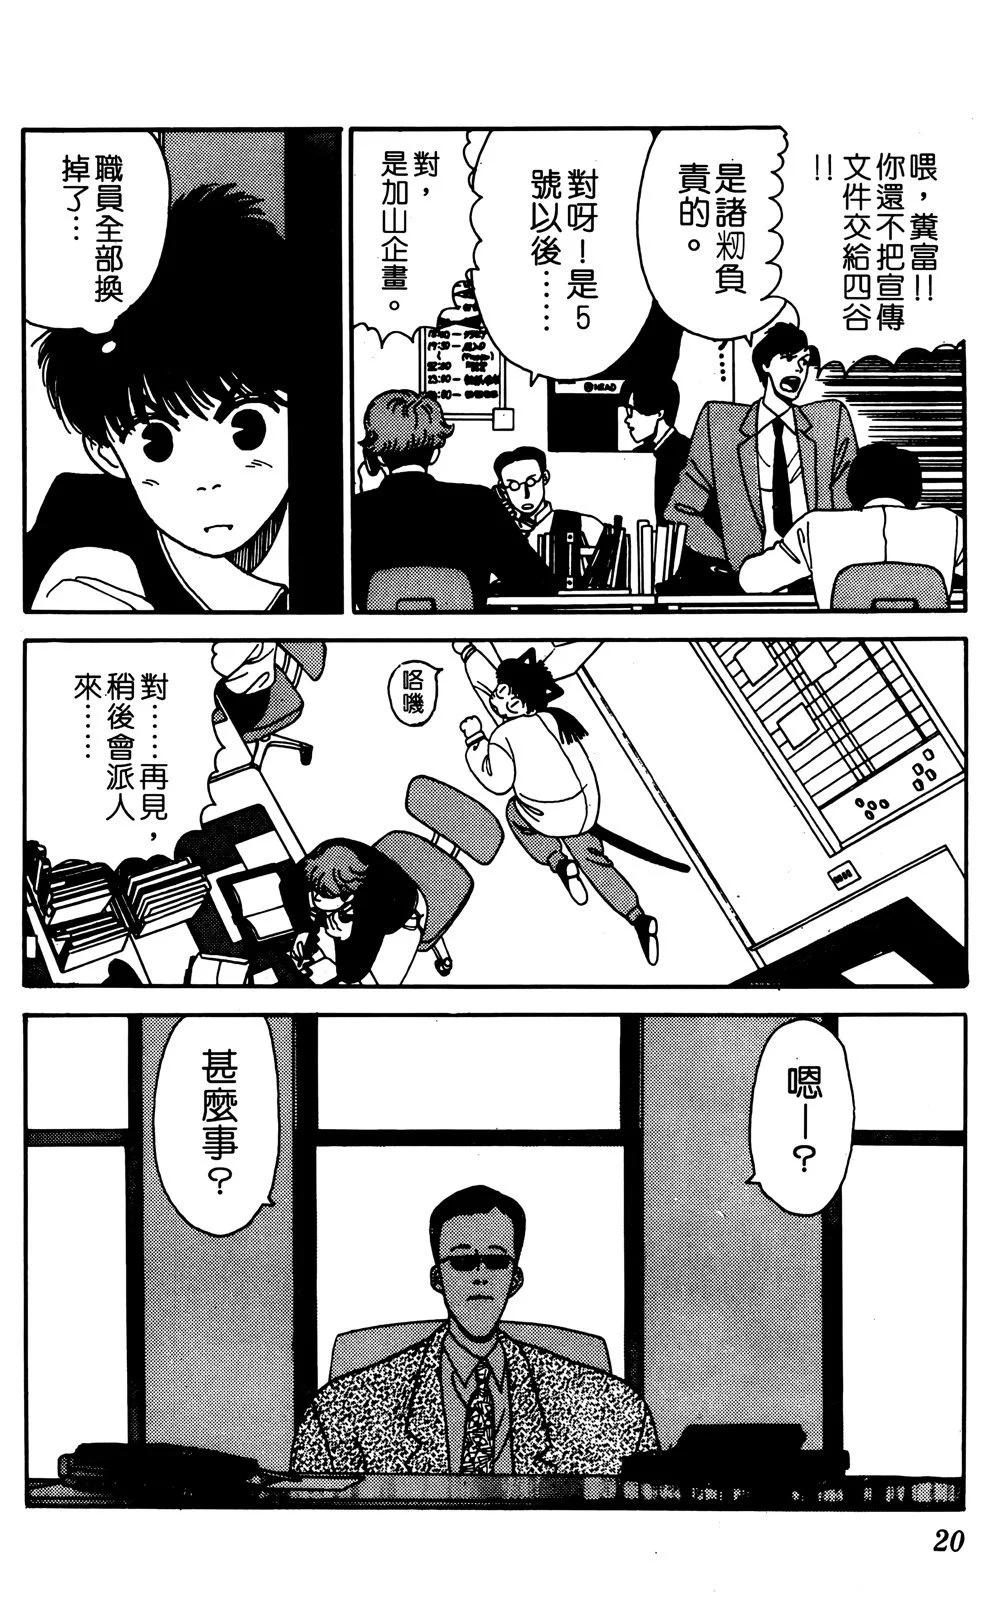 TO-Y - 第09卷(1/4) - 5